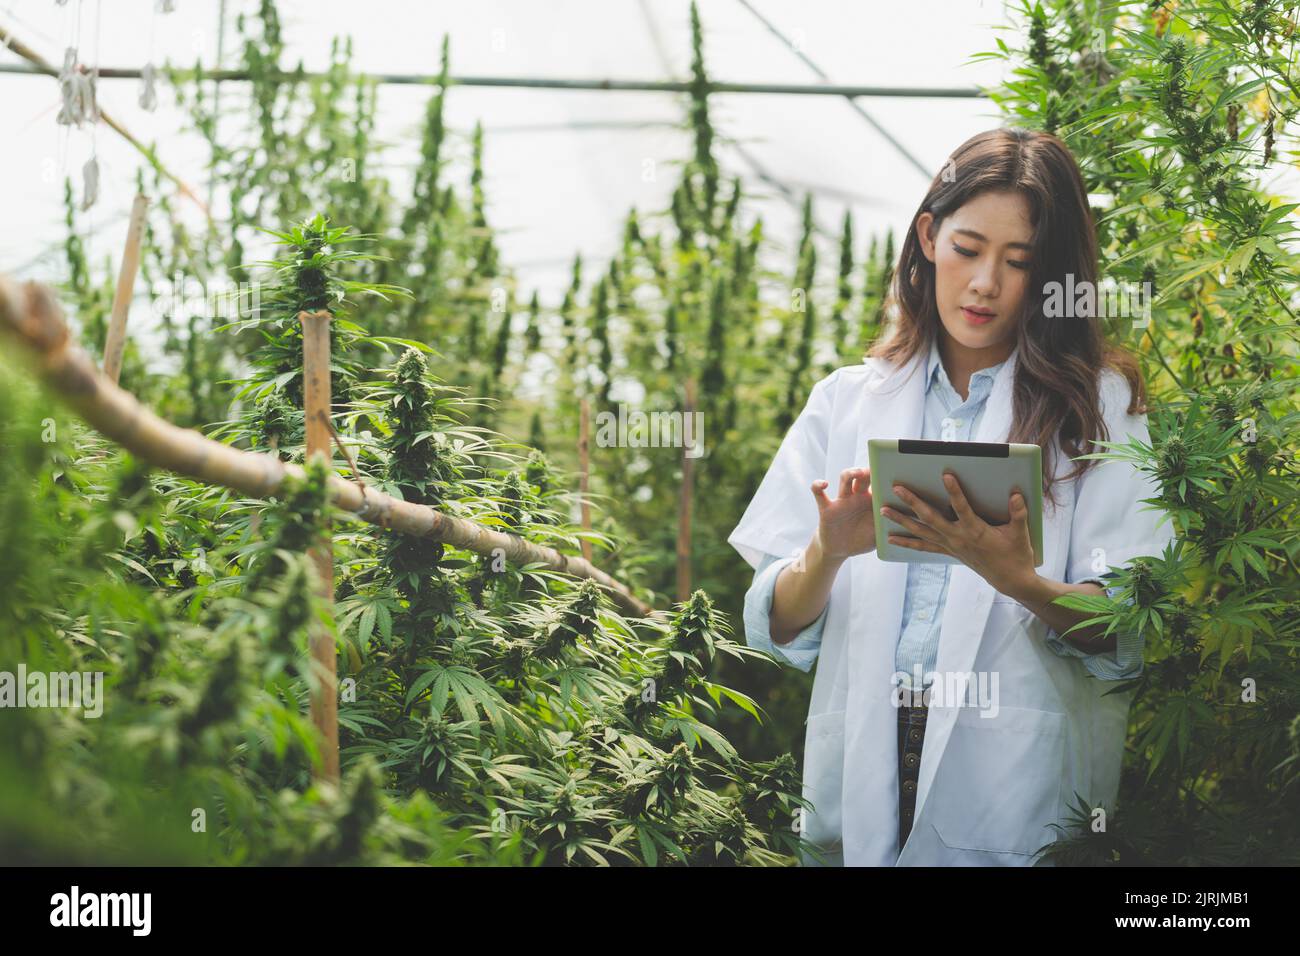 Scientists examine and analyze cannabis plants, sign results with laptops in greenhouses, alternative medicine concepts, herbs, CBD oil, pharmaceutica Stock Photo